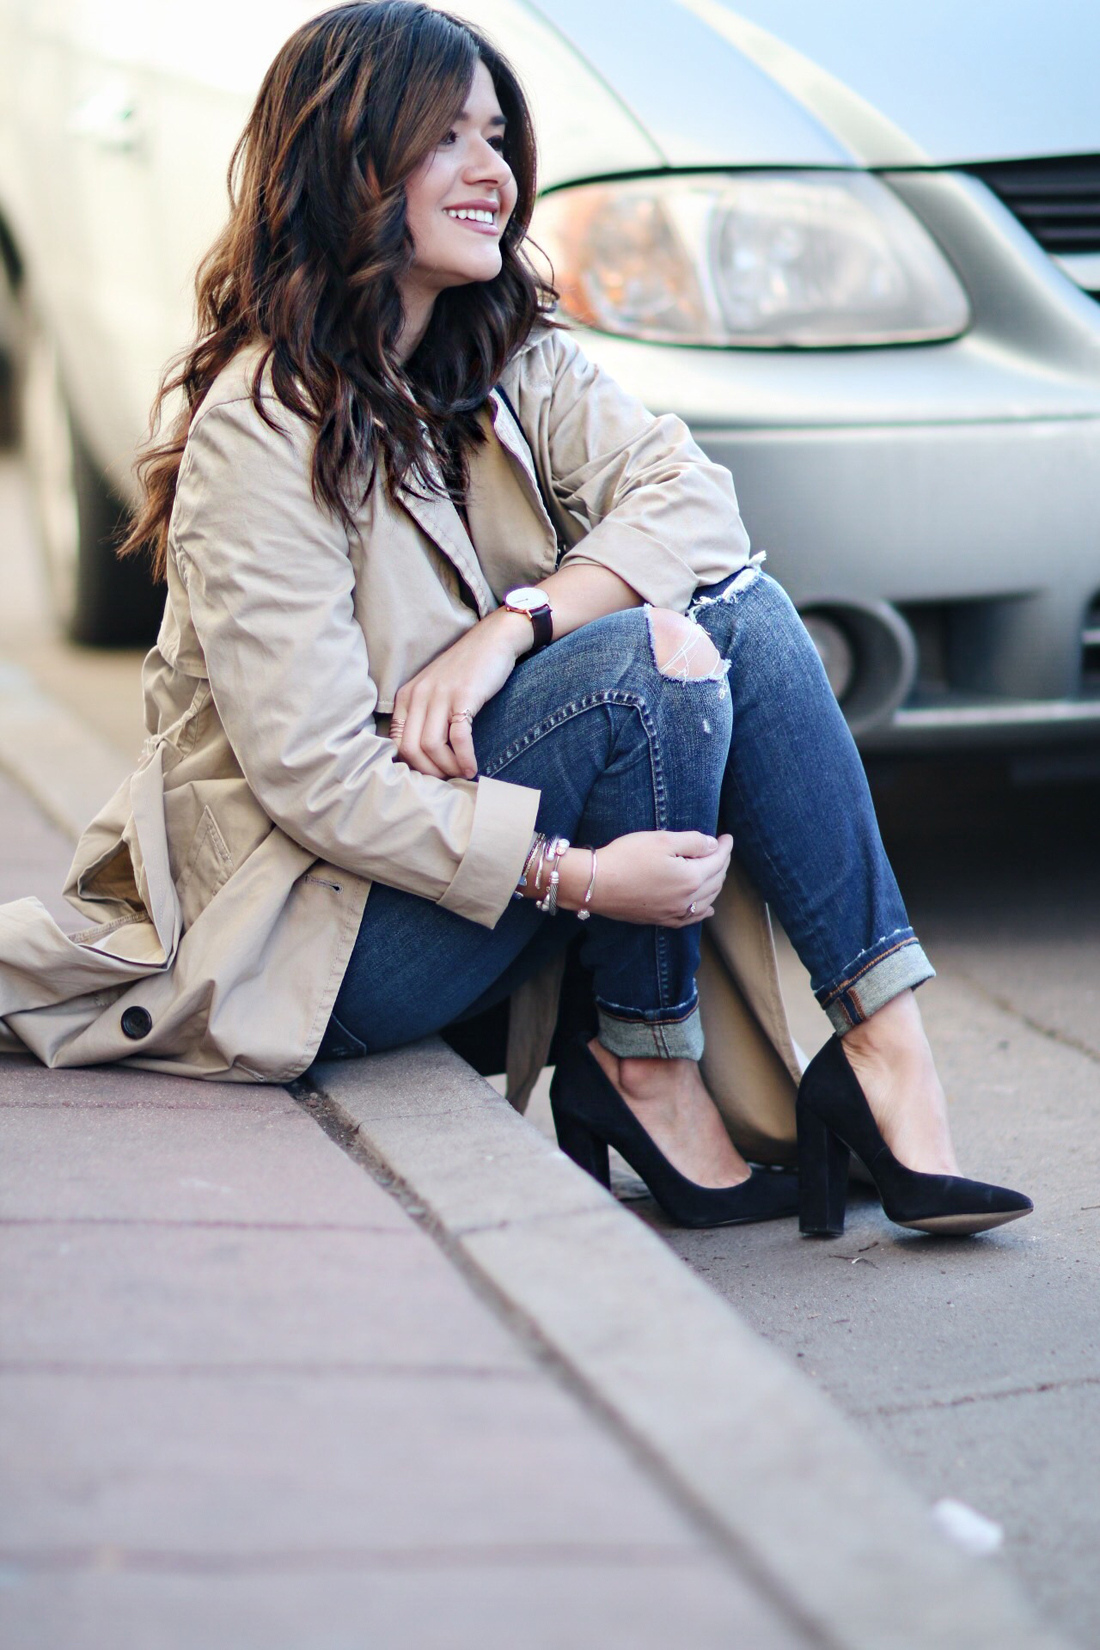 Carolina Hellal of Chic Talk wearing a Madewell trench coat, ripped jeans, topshop white tank, Steve Madden black pumps and Rebecca Minkoff